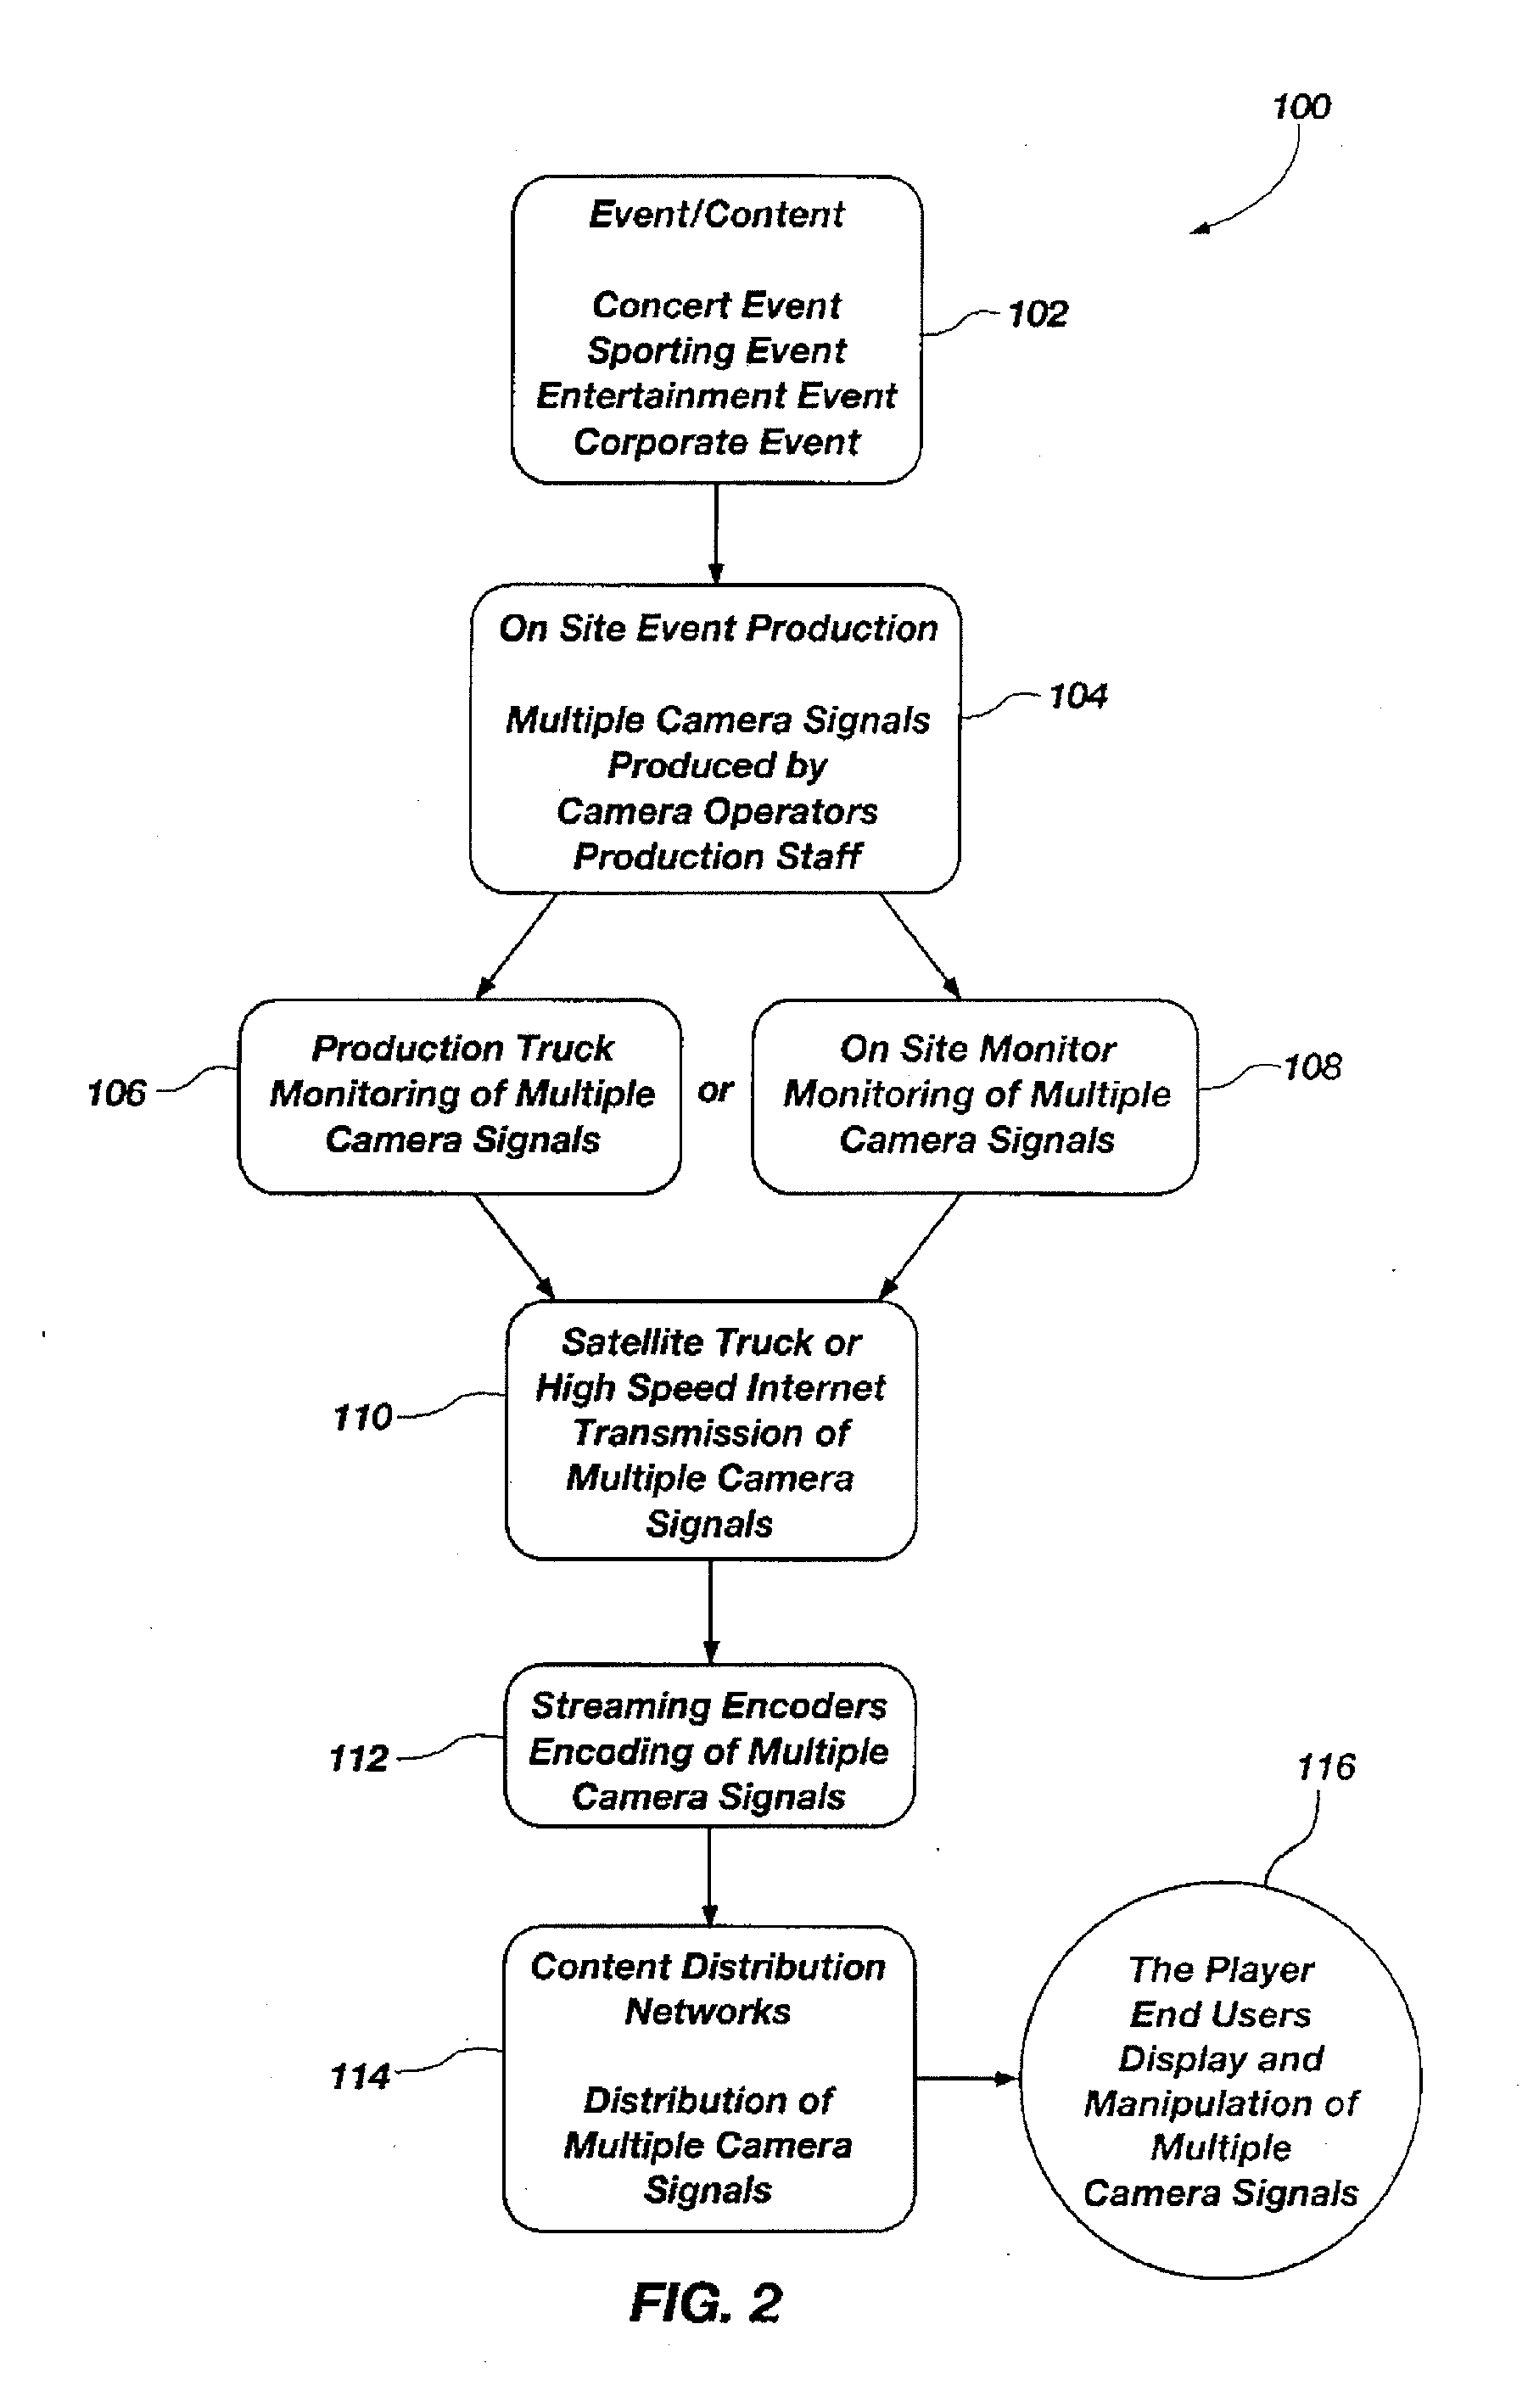 Media Systems and Methods for Providing Synchronized Multiple Streaming Camera Signals of an Event